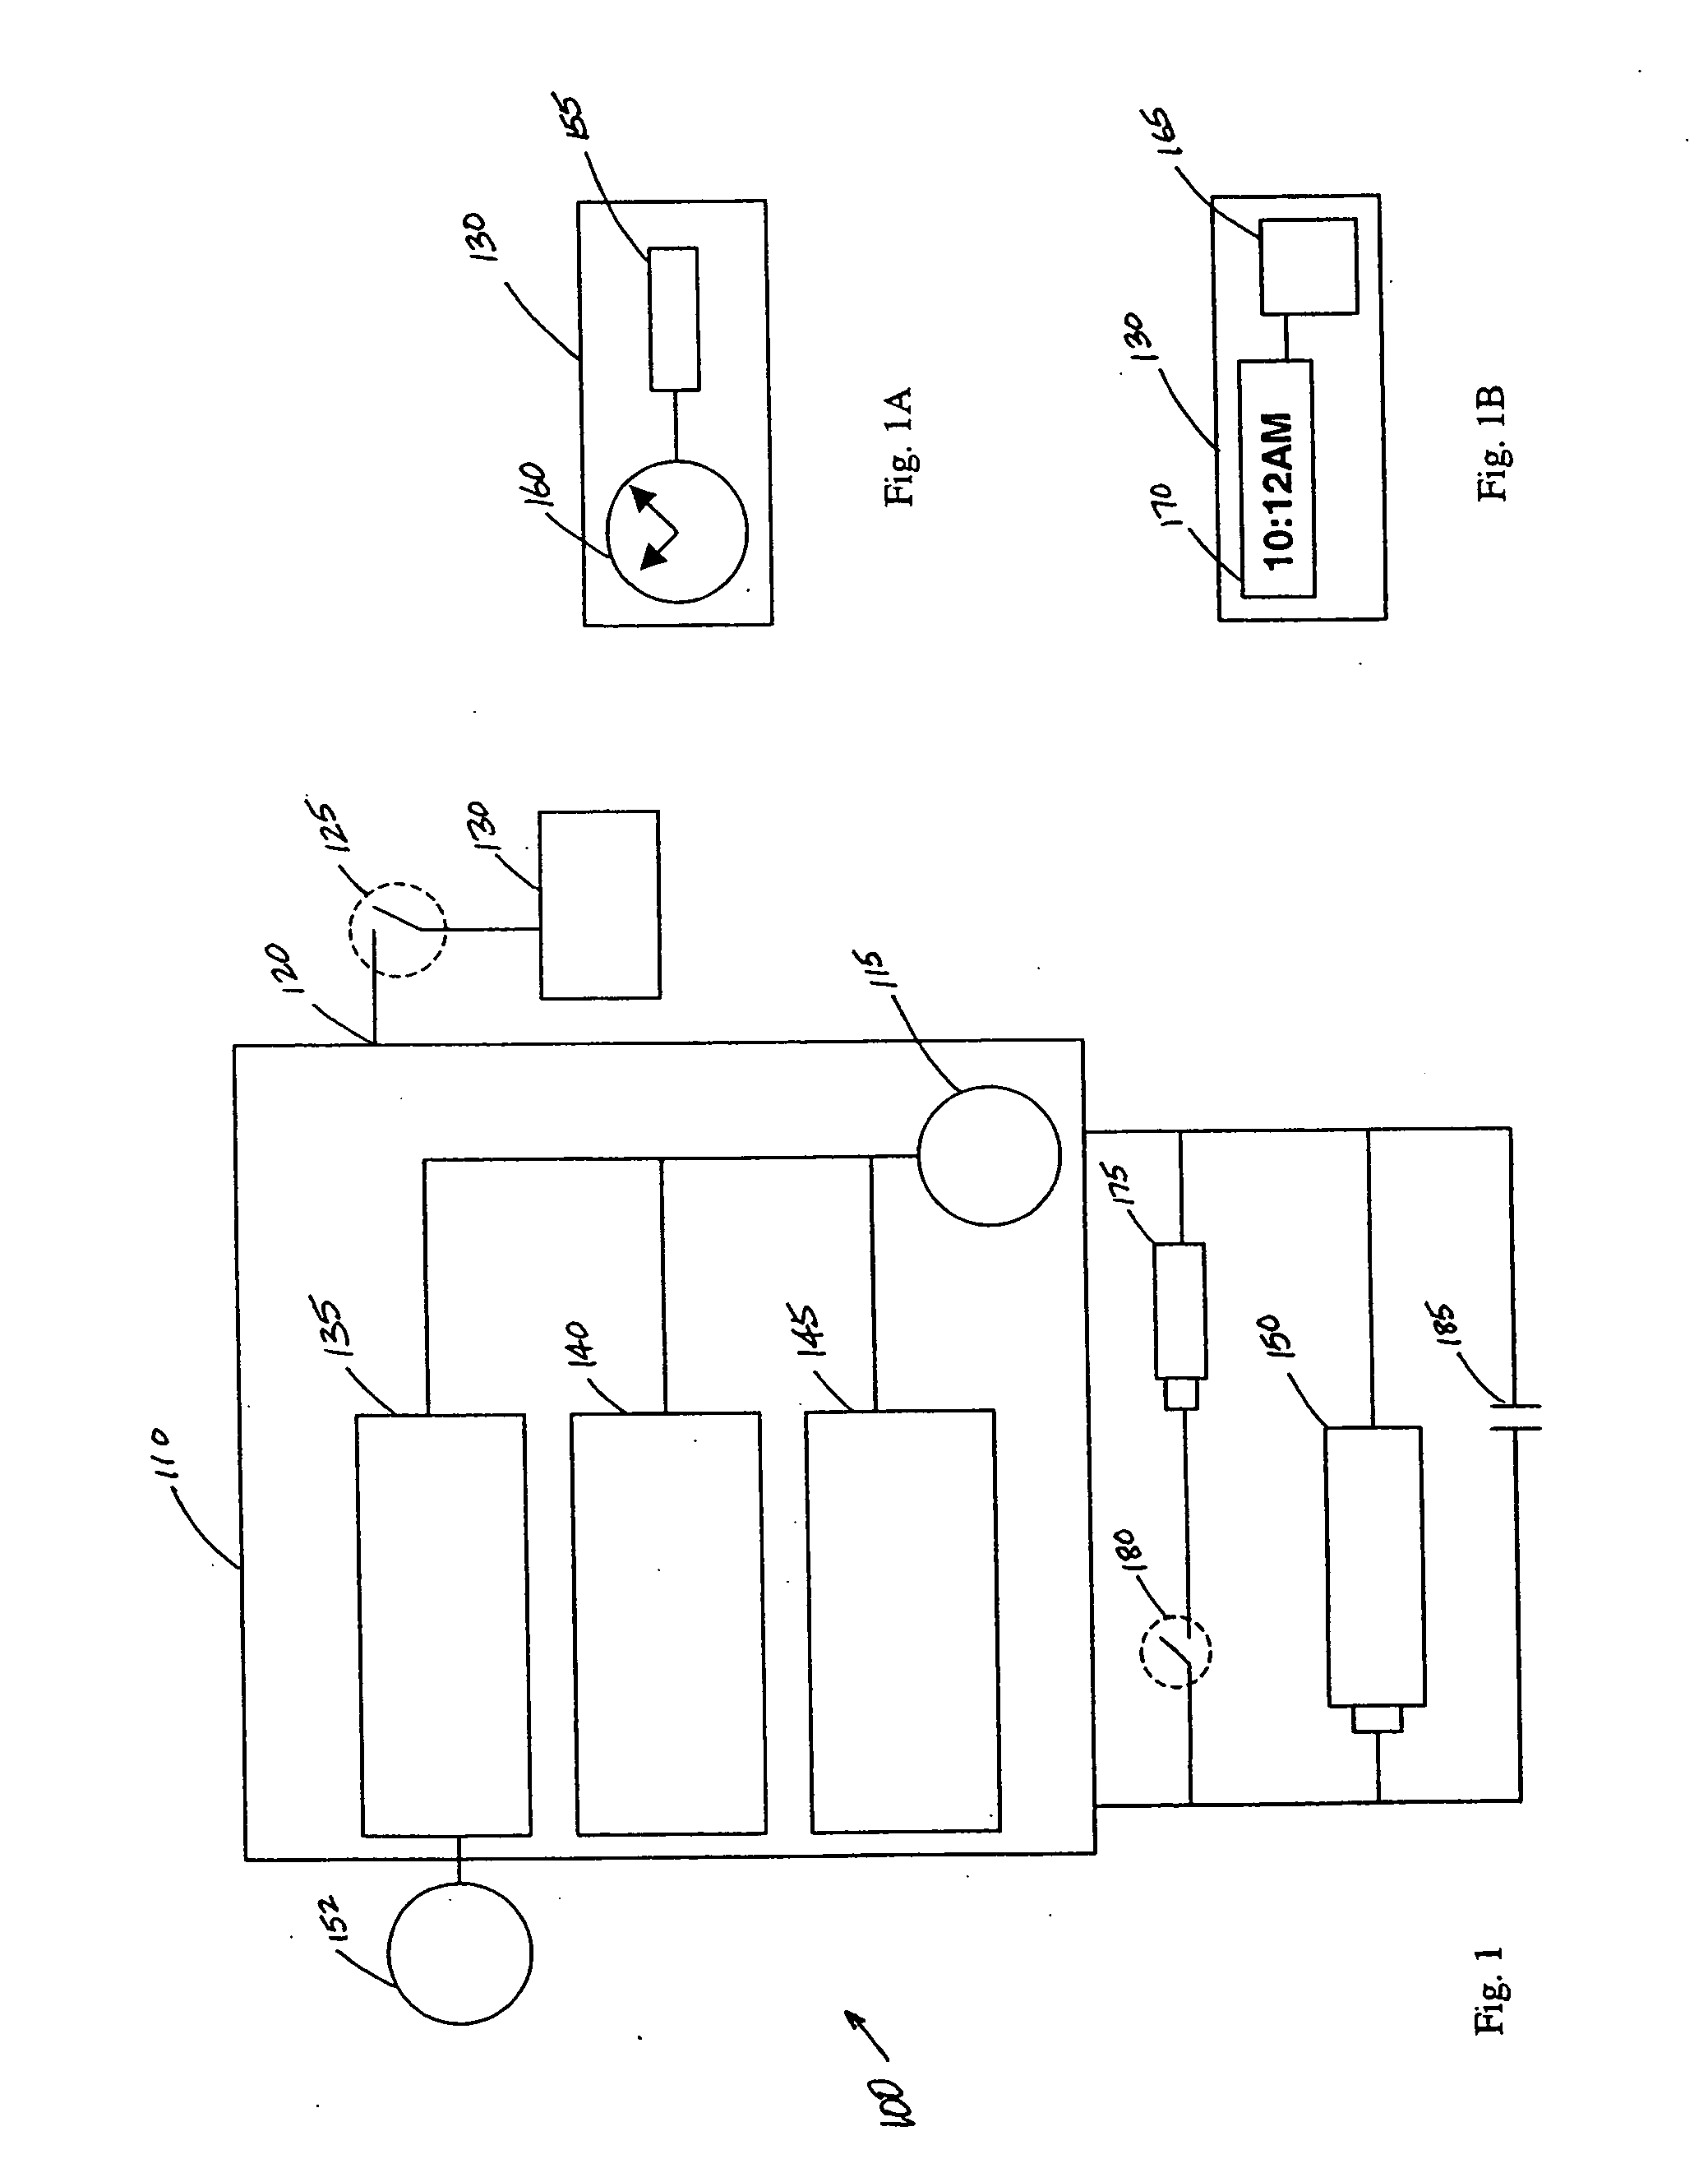 Time keeping system with automatic daylight savings time adjustment